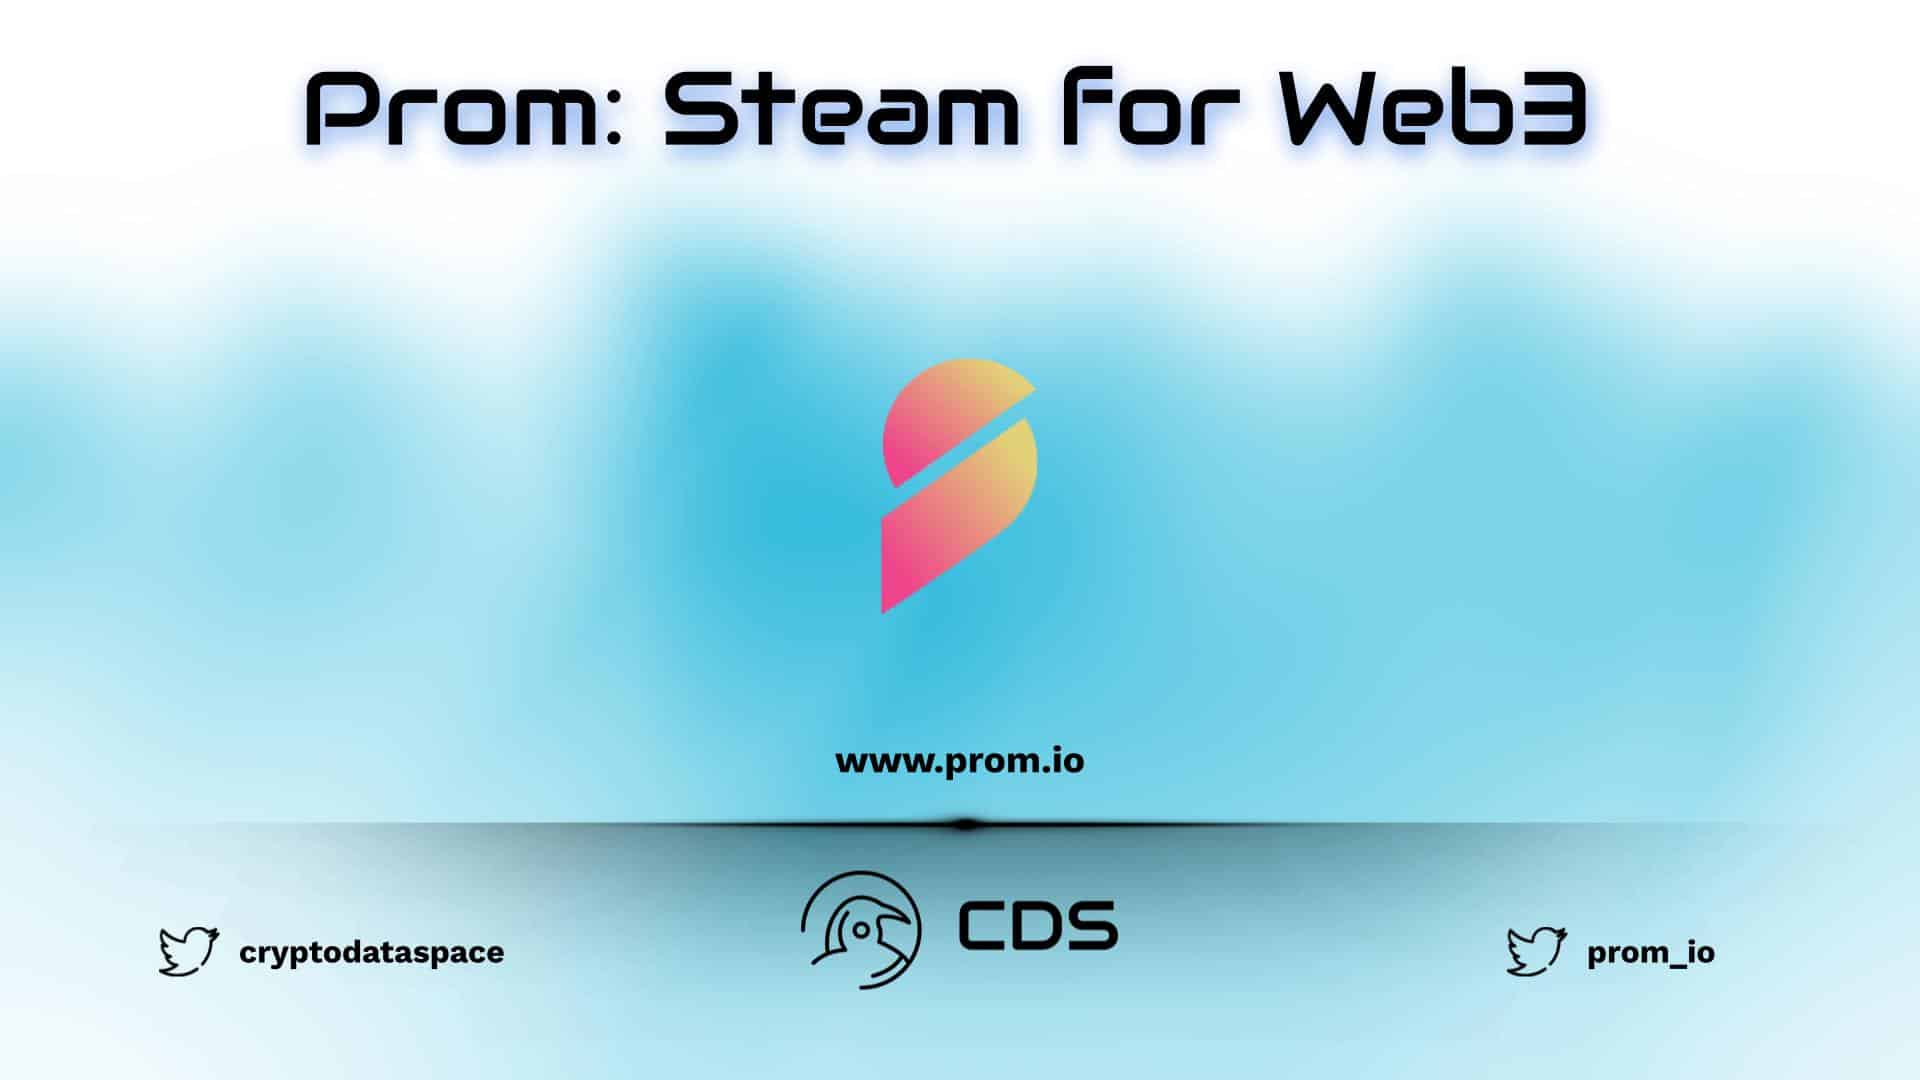 Prom: Steam for Web3